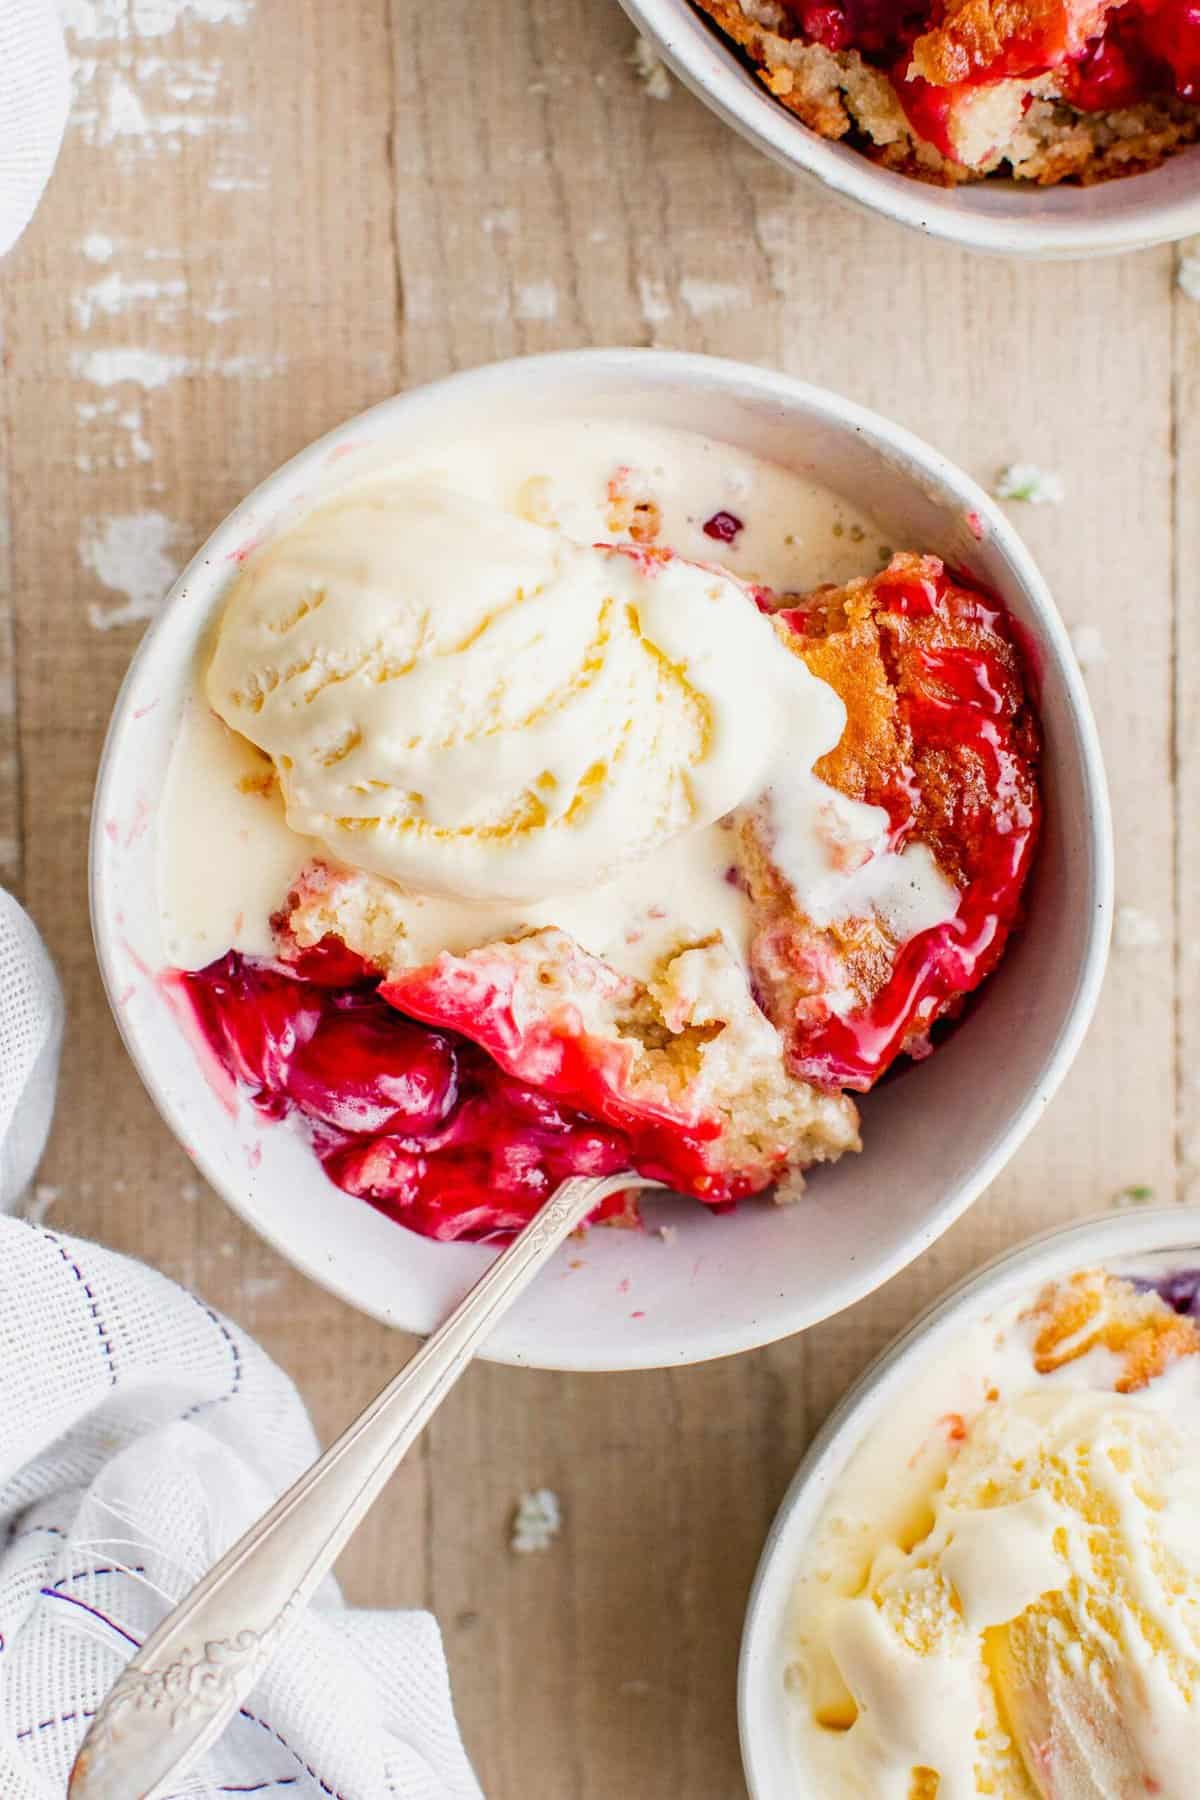 Overhead view of cherry cobbler in bowl with ice cream